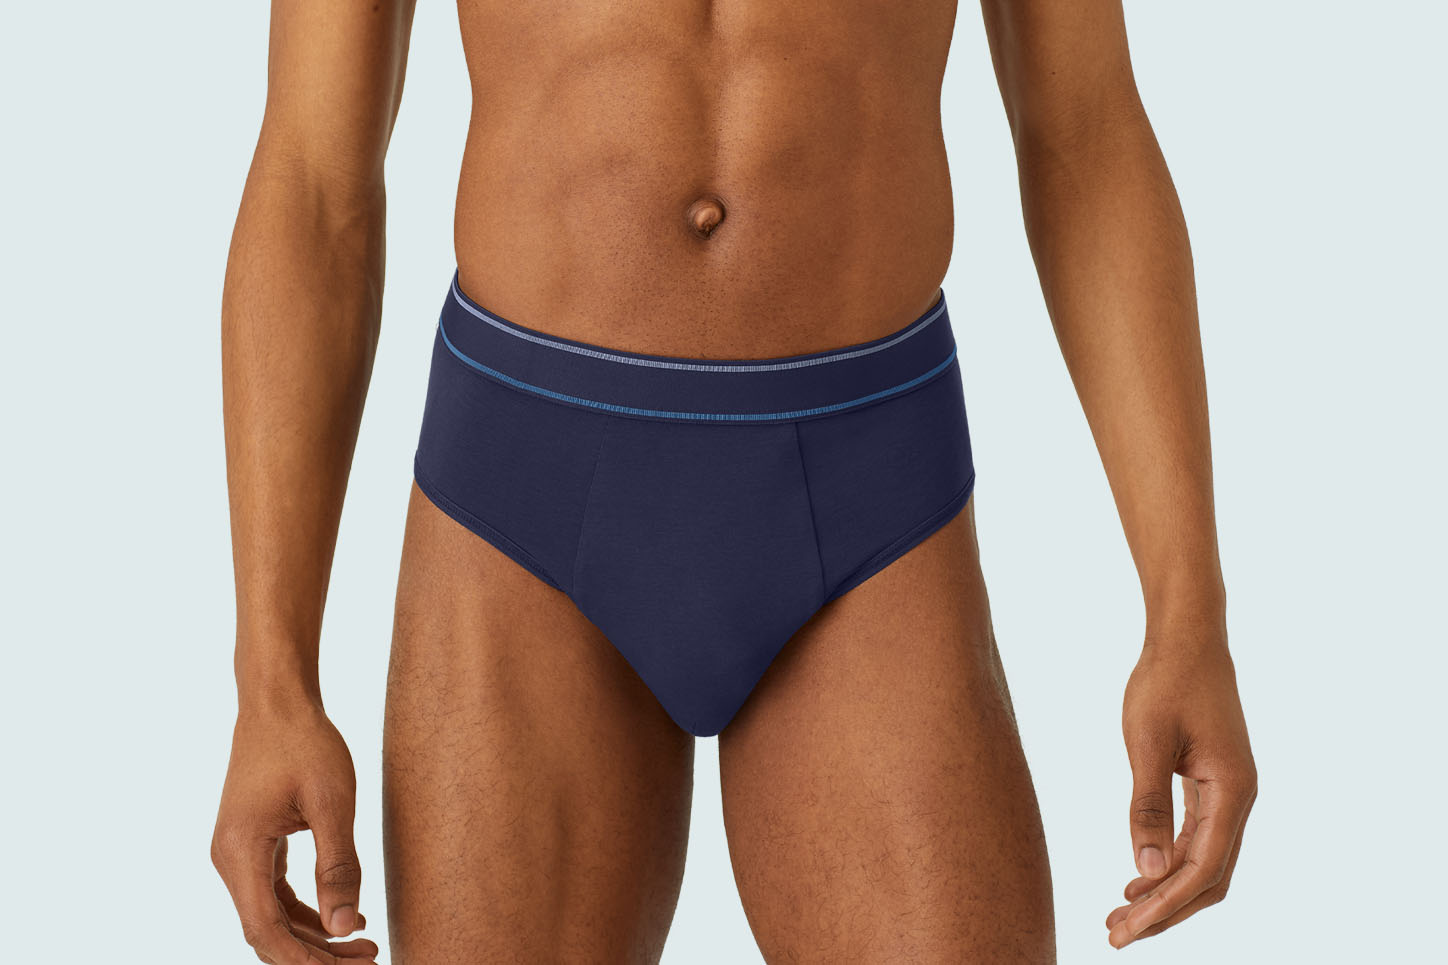 Bombas on X: Introducing our newest creation: Bombas Underwear